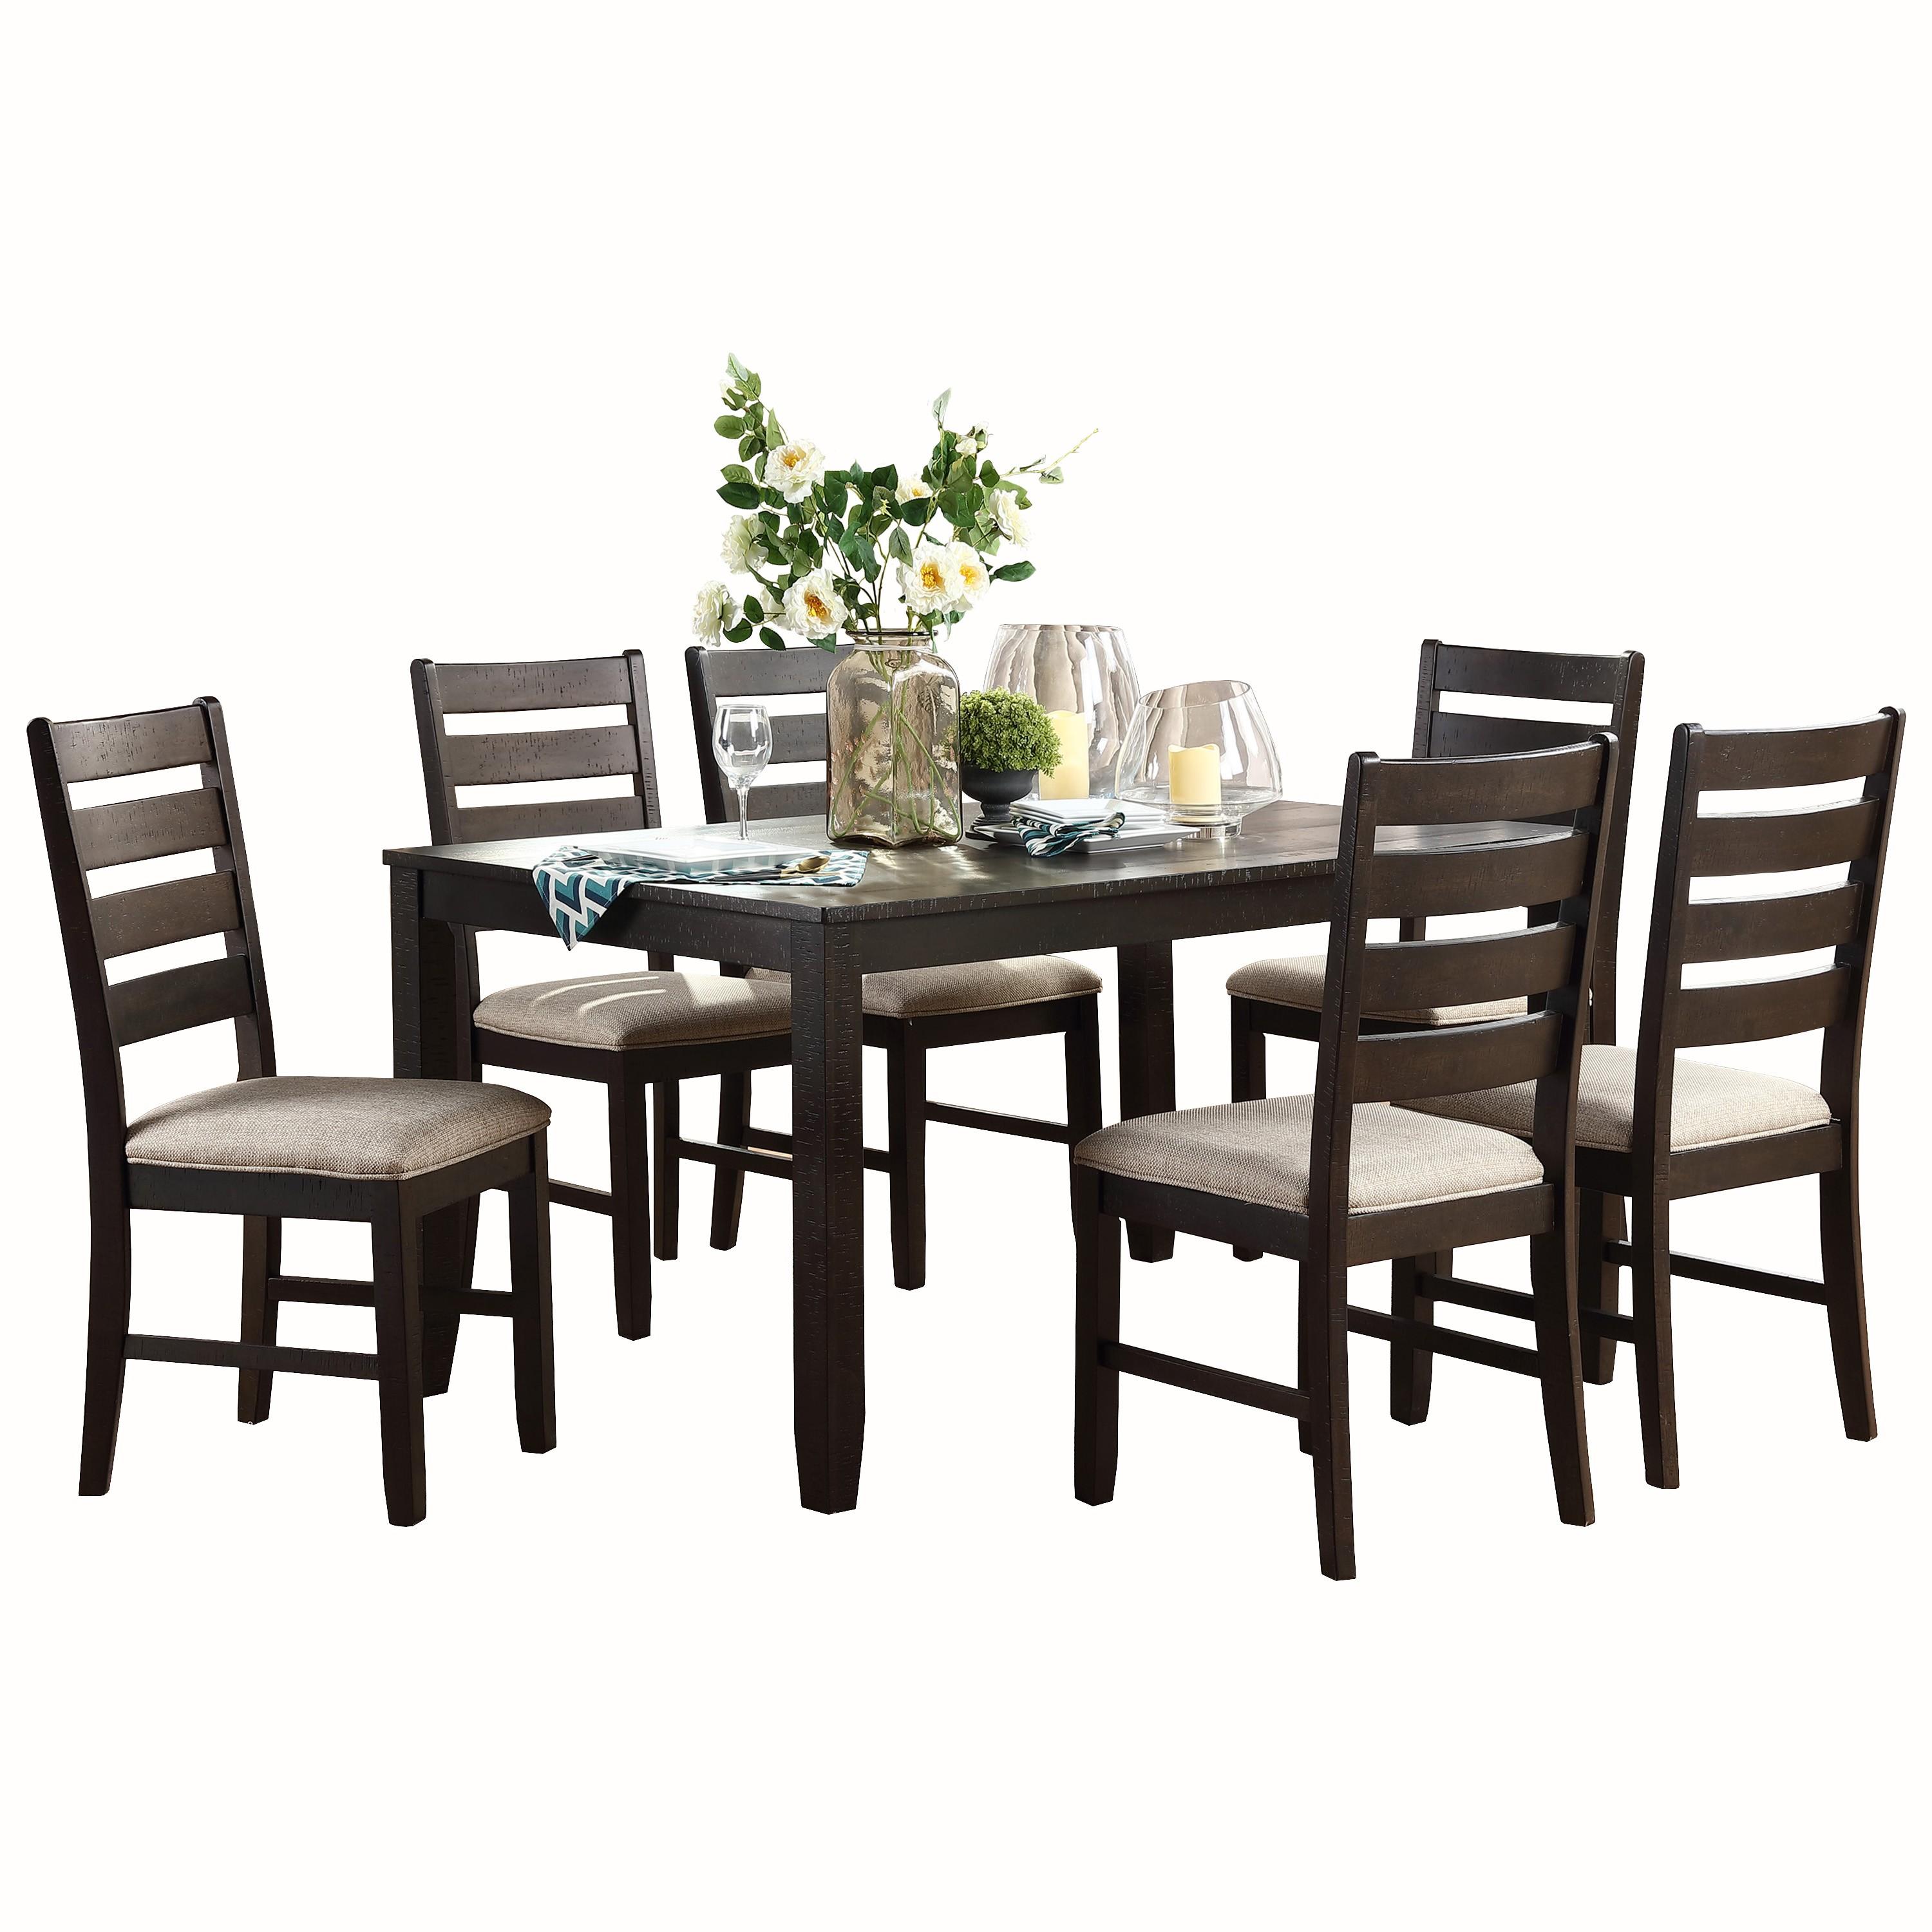 Transitional Dining Room Set 5709 Blair Farm 5709 in Brown Polyester